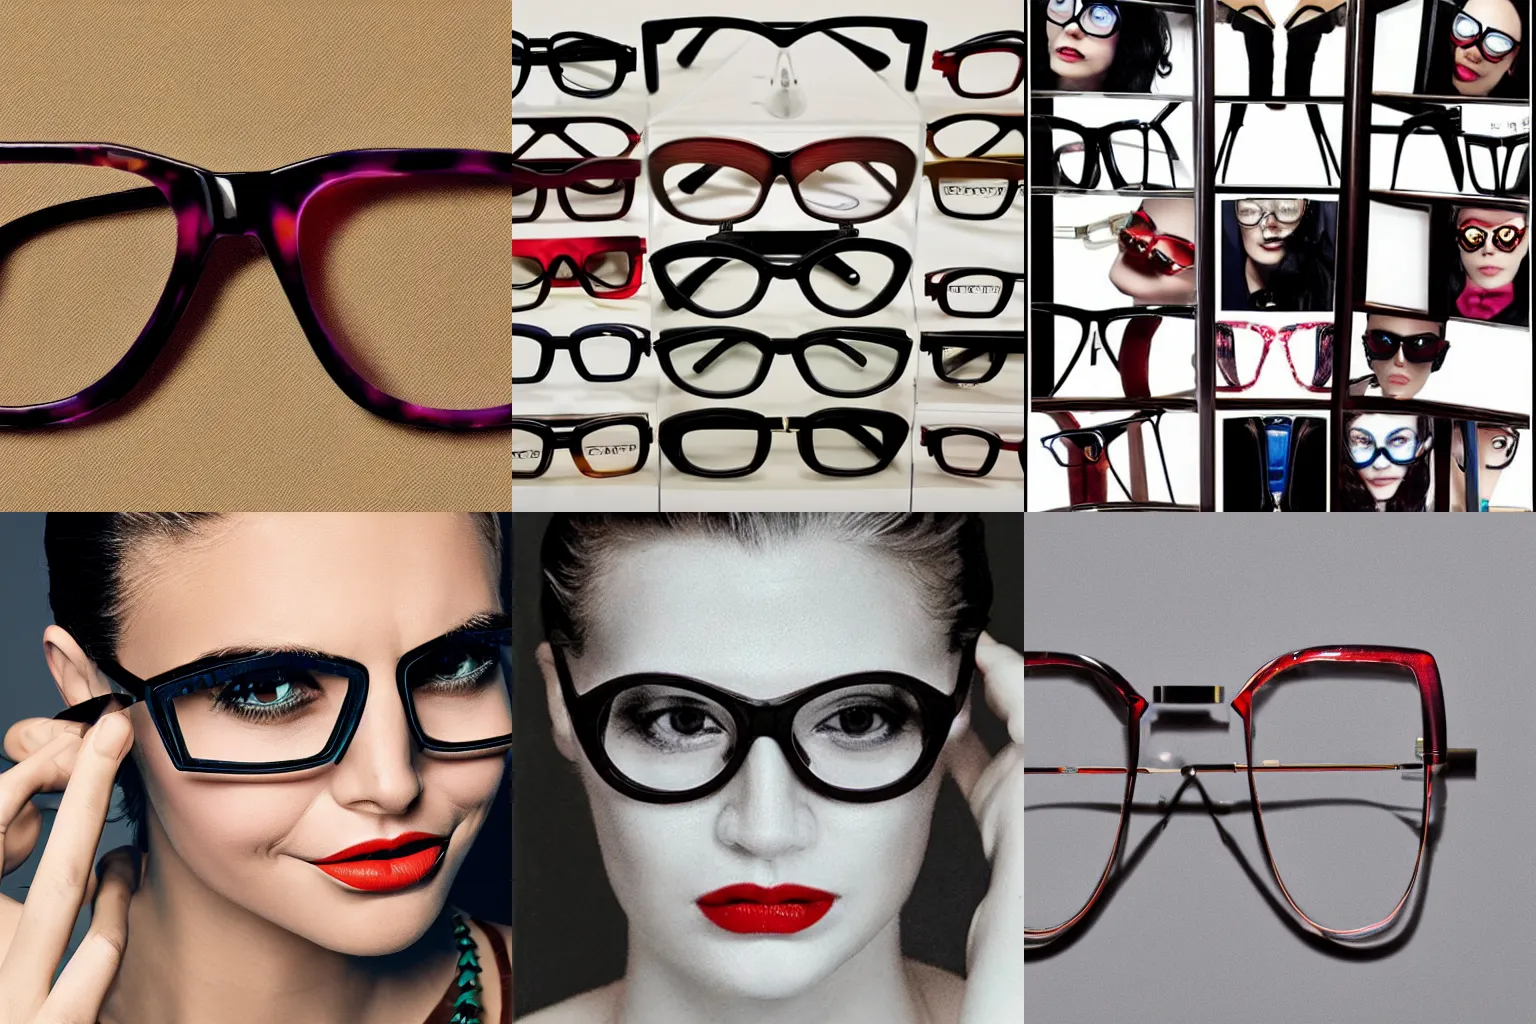 designer eyeglass collection by the Joker, Magazine | Stable Diffusion ...